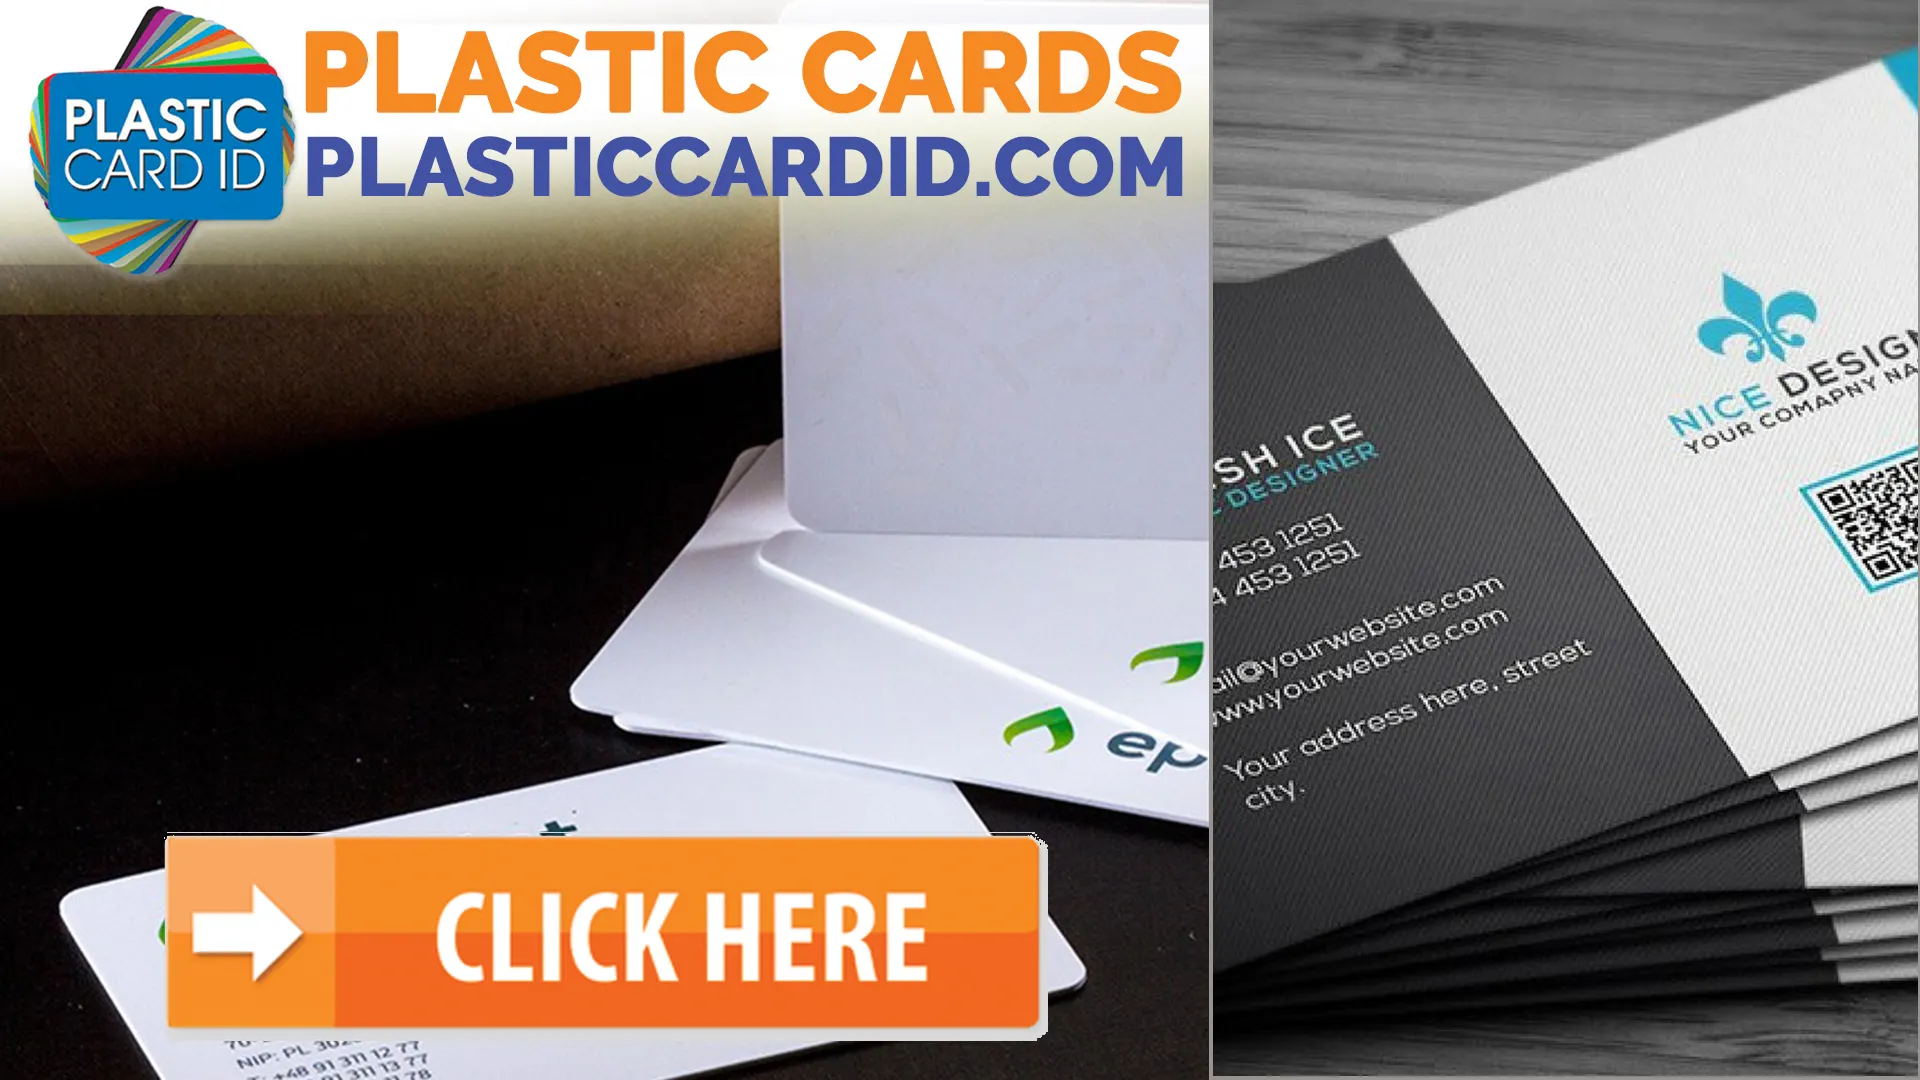 Top-Quality Plastic Cards for Every Purpose